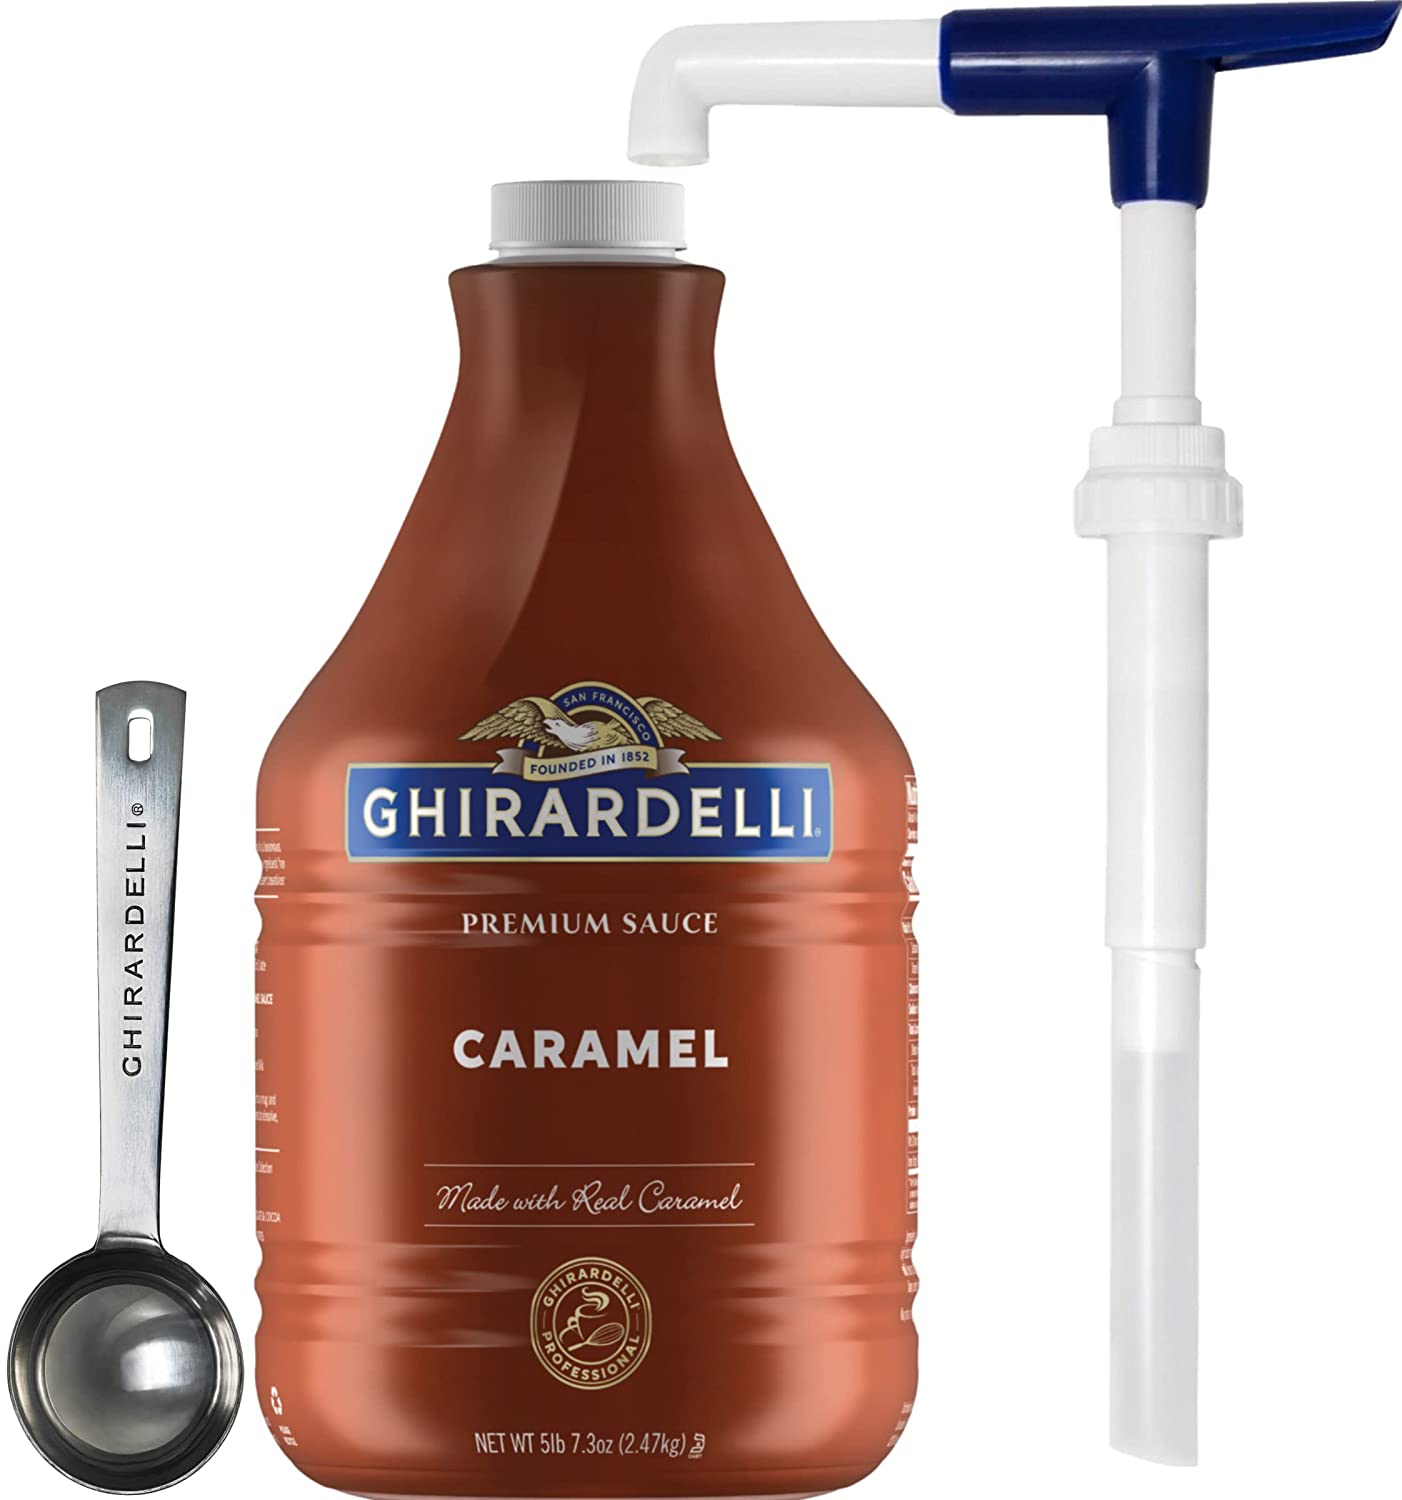 Ghirardelli - 90.4 Ounce Creamy Caramel Sauce Bottle - with Exclusive Measuring Spoon & 1.5 Ounce Ghirardelli Pump